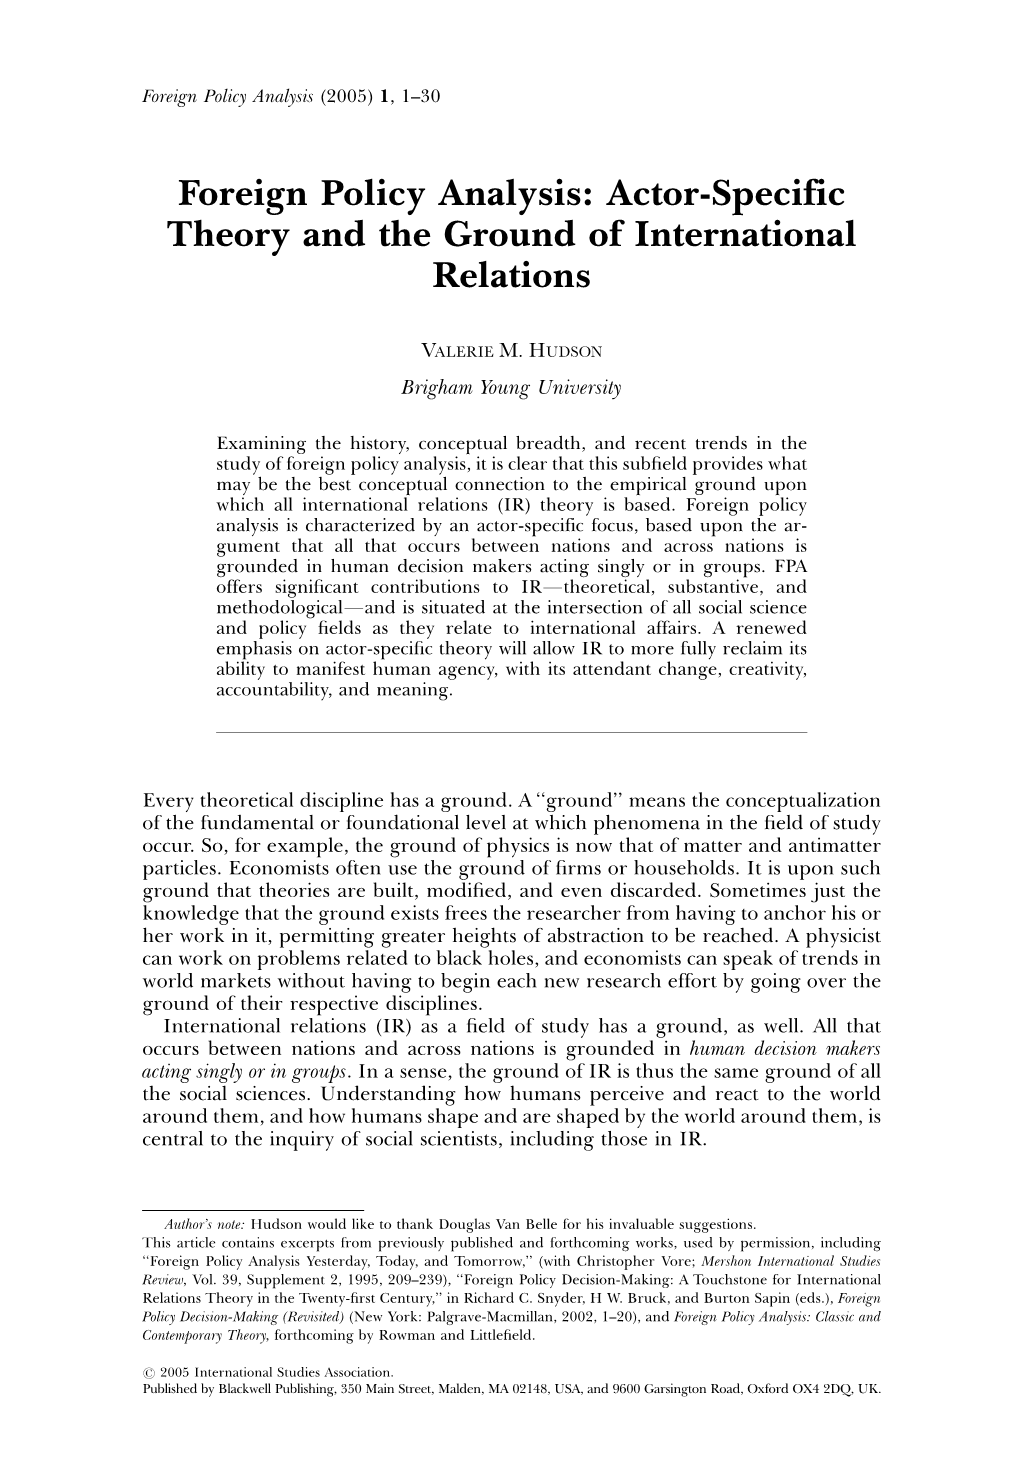 Foreign Policy Analysis: Actor-Specific Theory and the Ground of International Relations